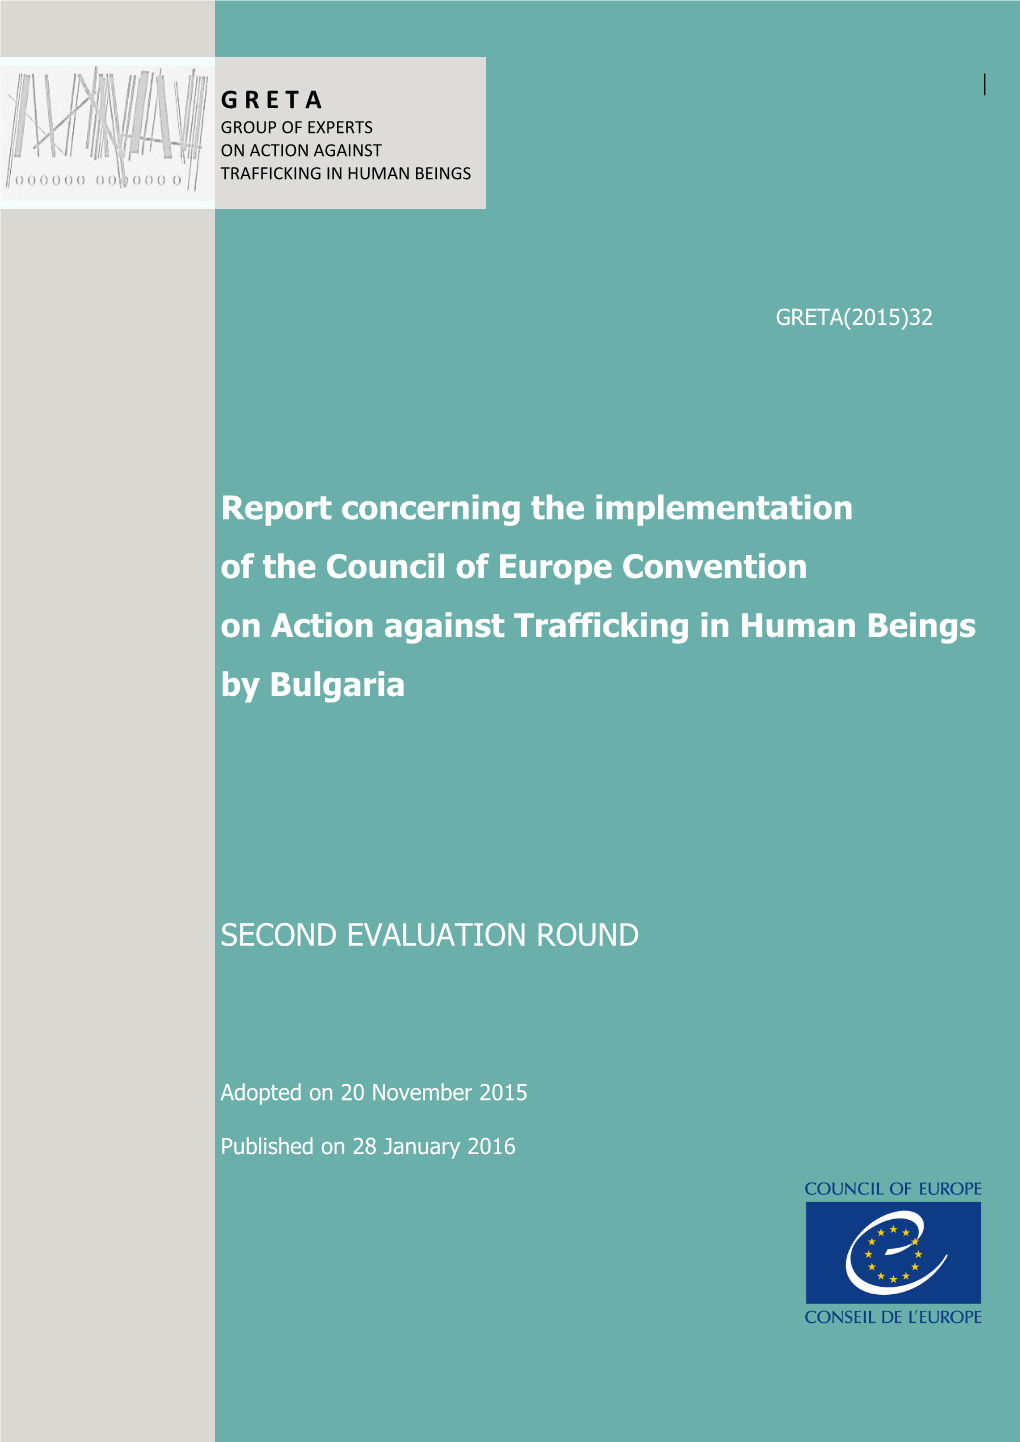 Report Concerning the Implementation of the Council of Europe Convention on Action Against Trafficking in Human Beings by Bulgaria